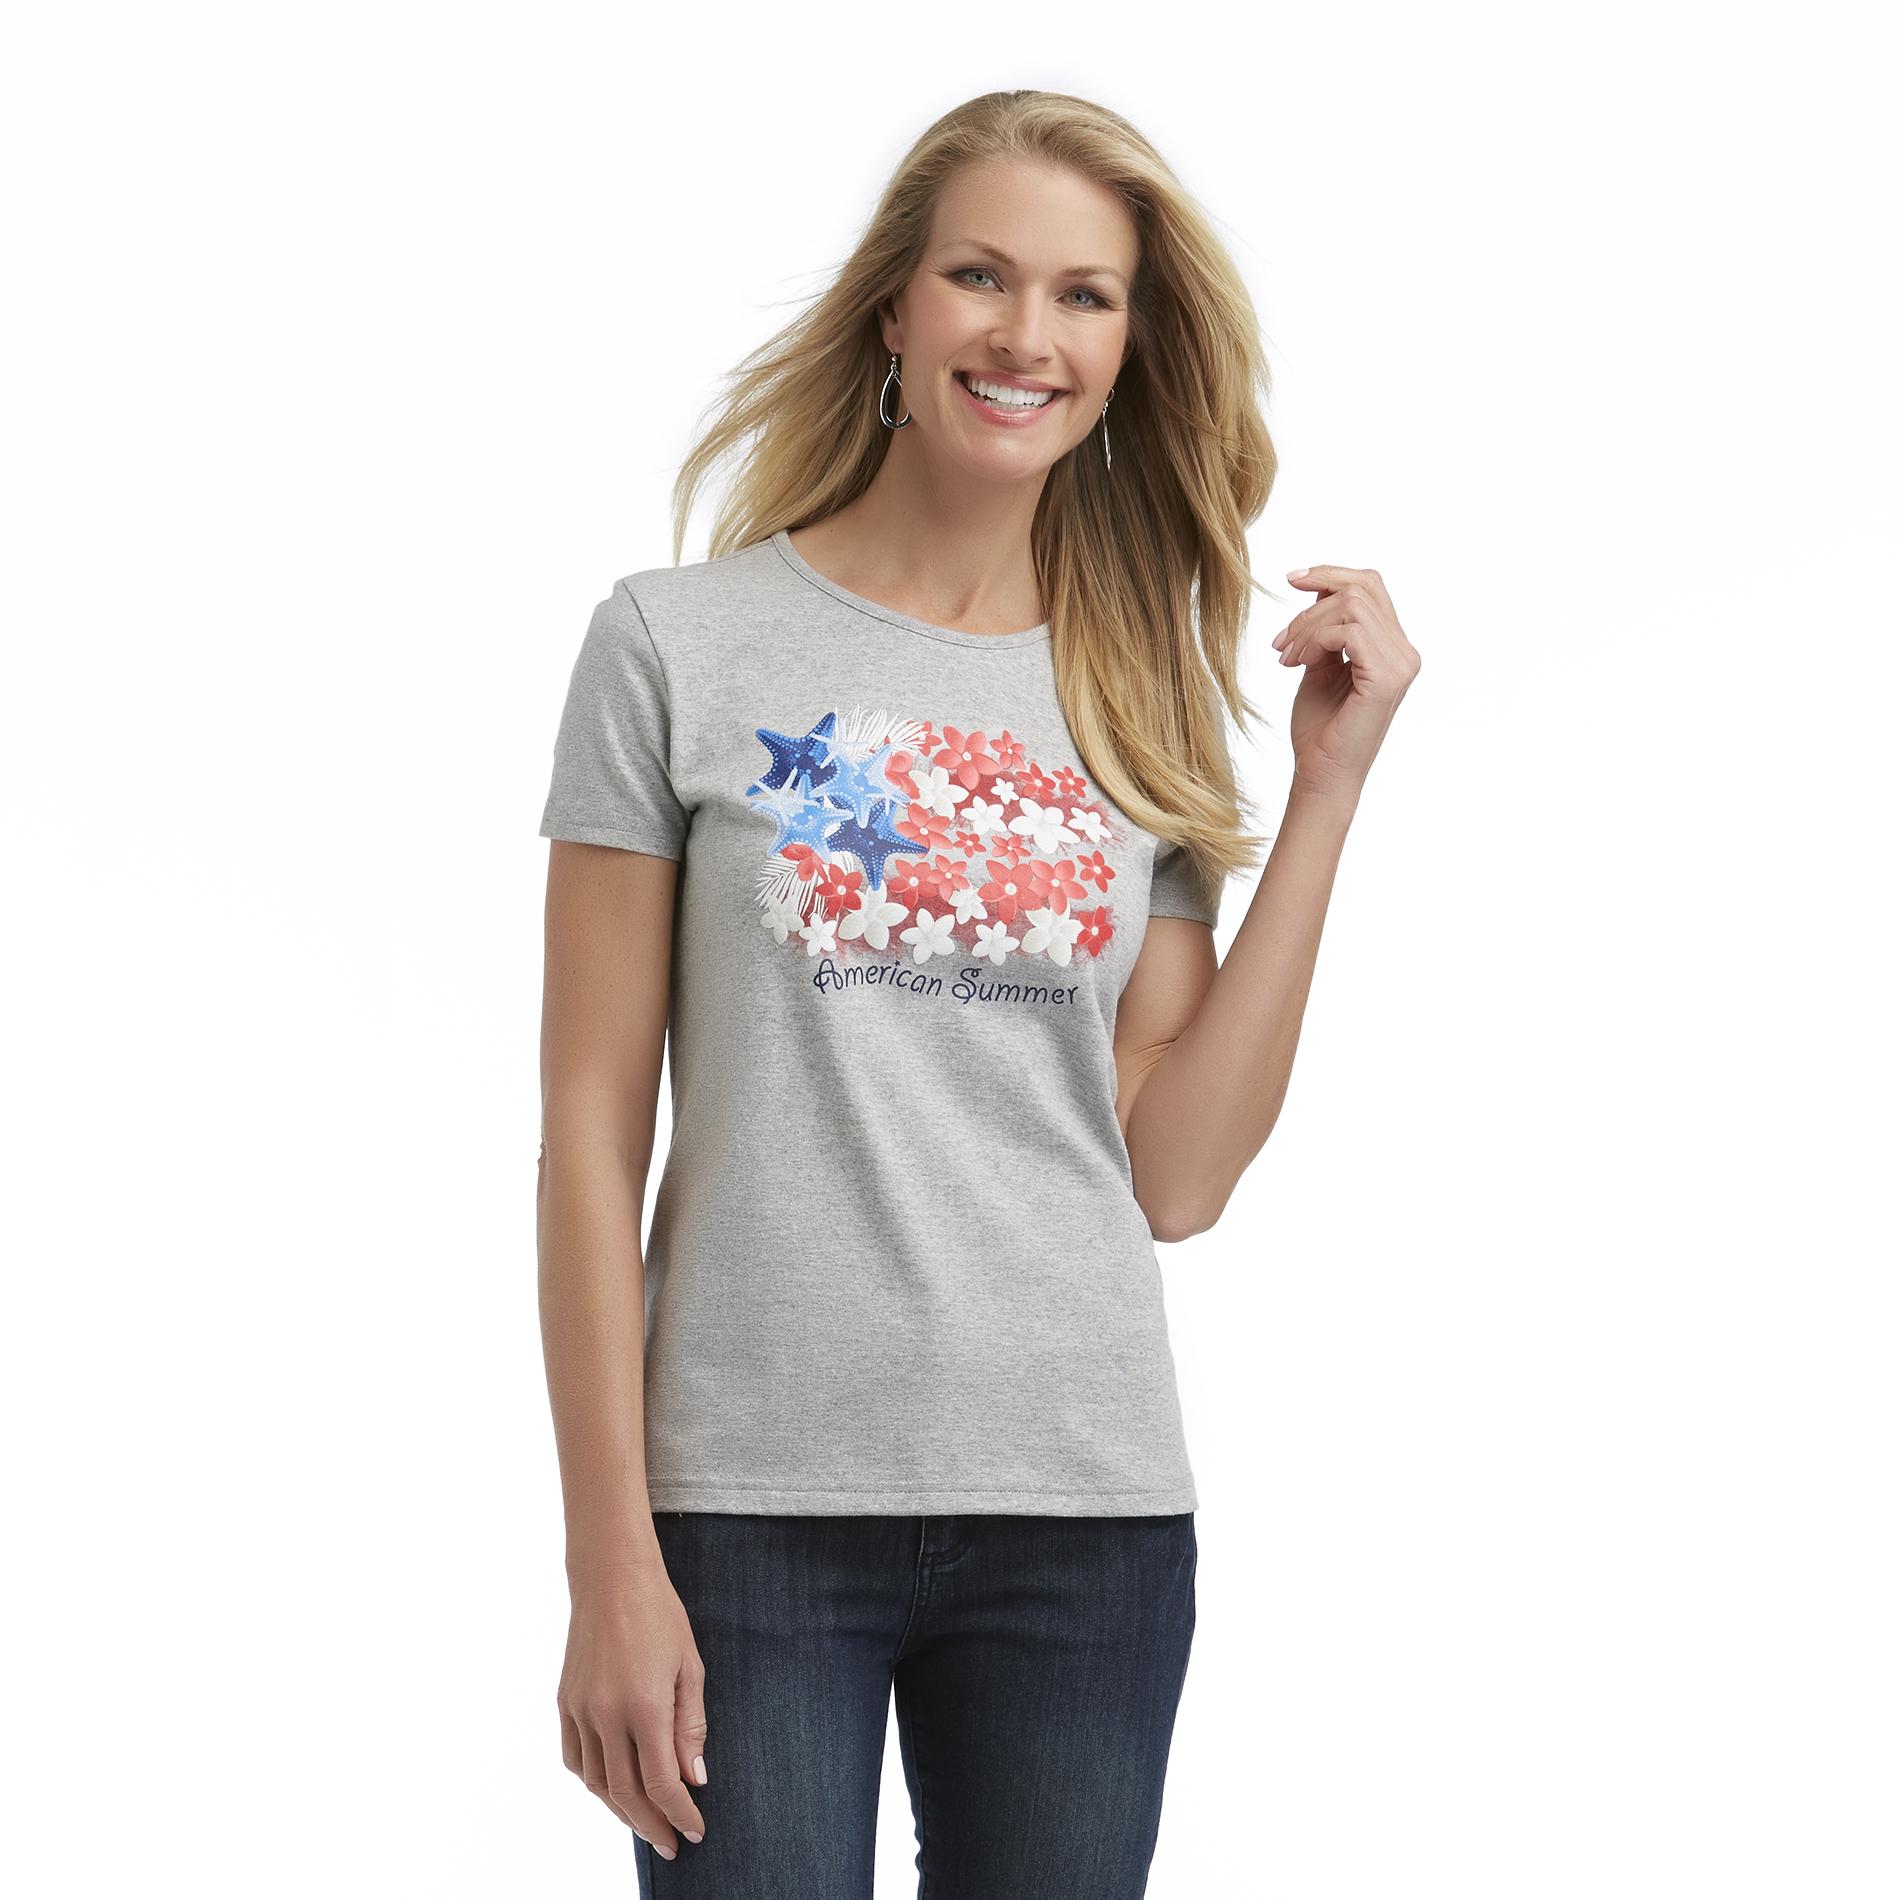 Holiday Editions Women's Graphic T-Shirt - Americana